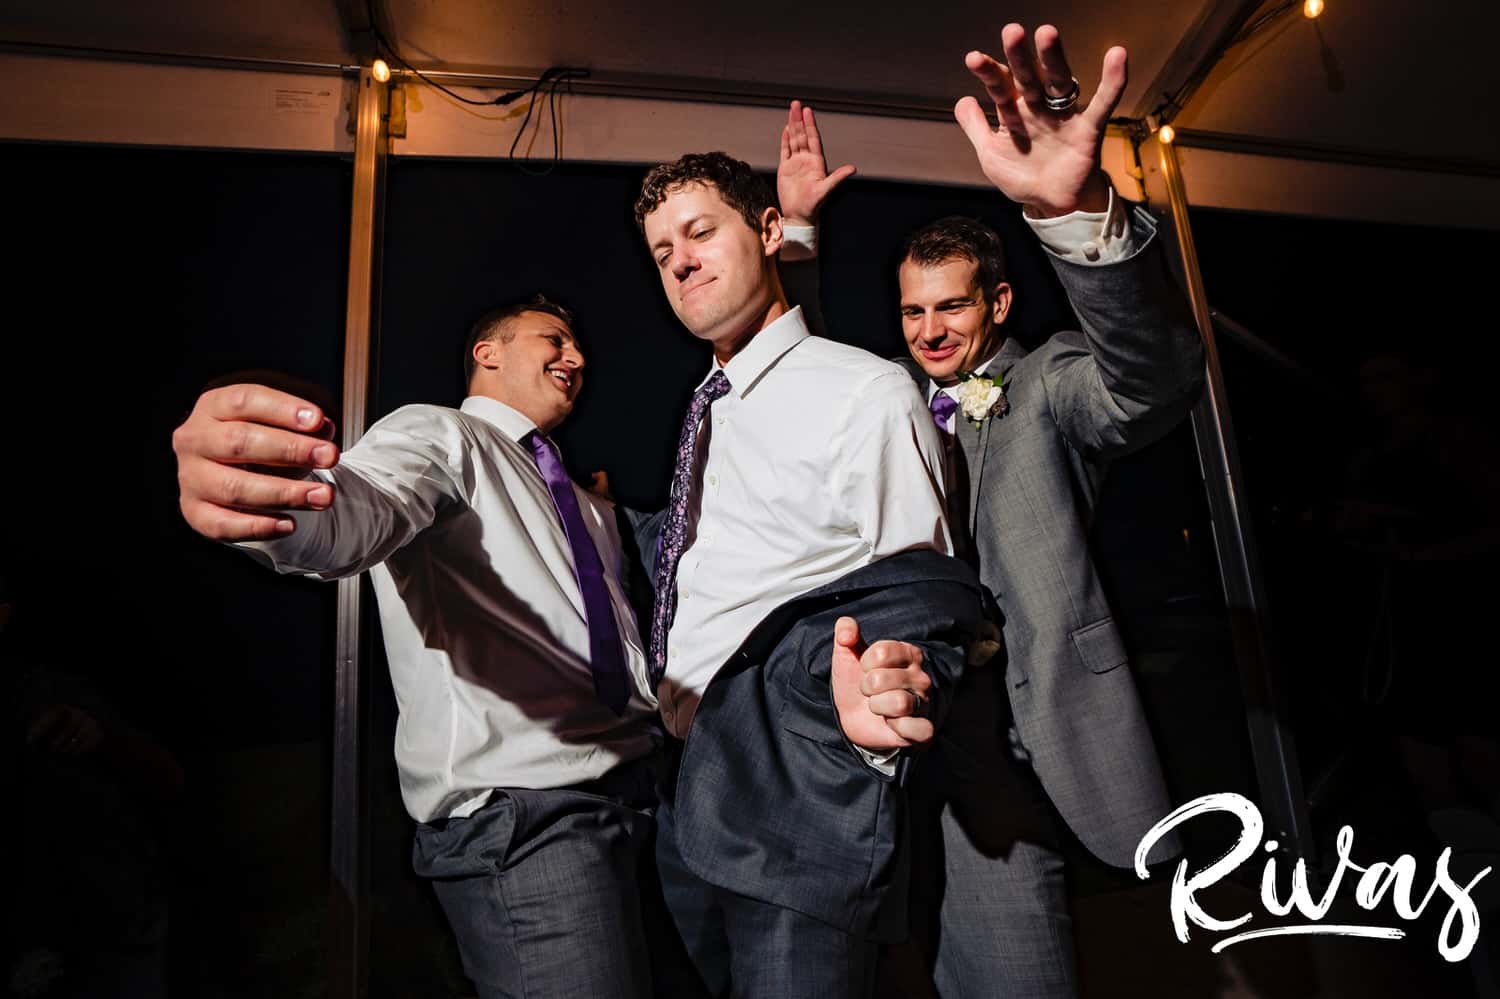 A candid picture of a groom and his groomsmen dancing together during a wedding reception at The Bowery in Kansas City. 